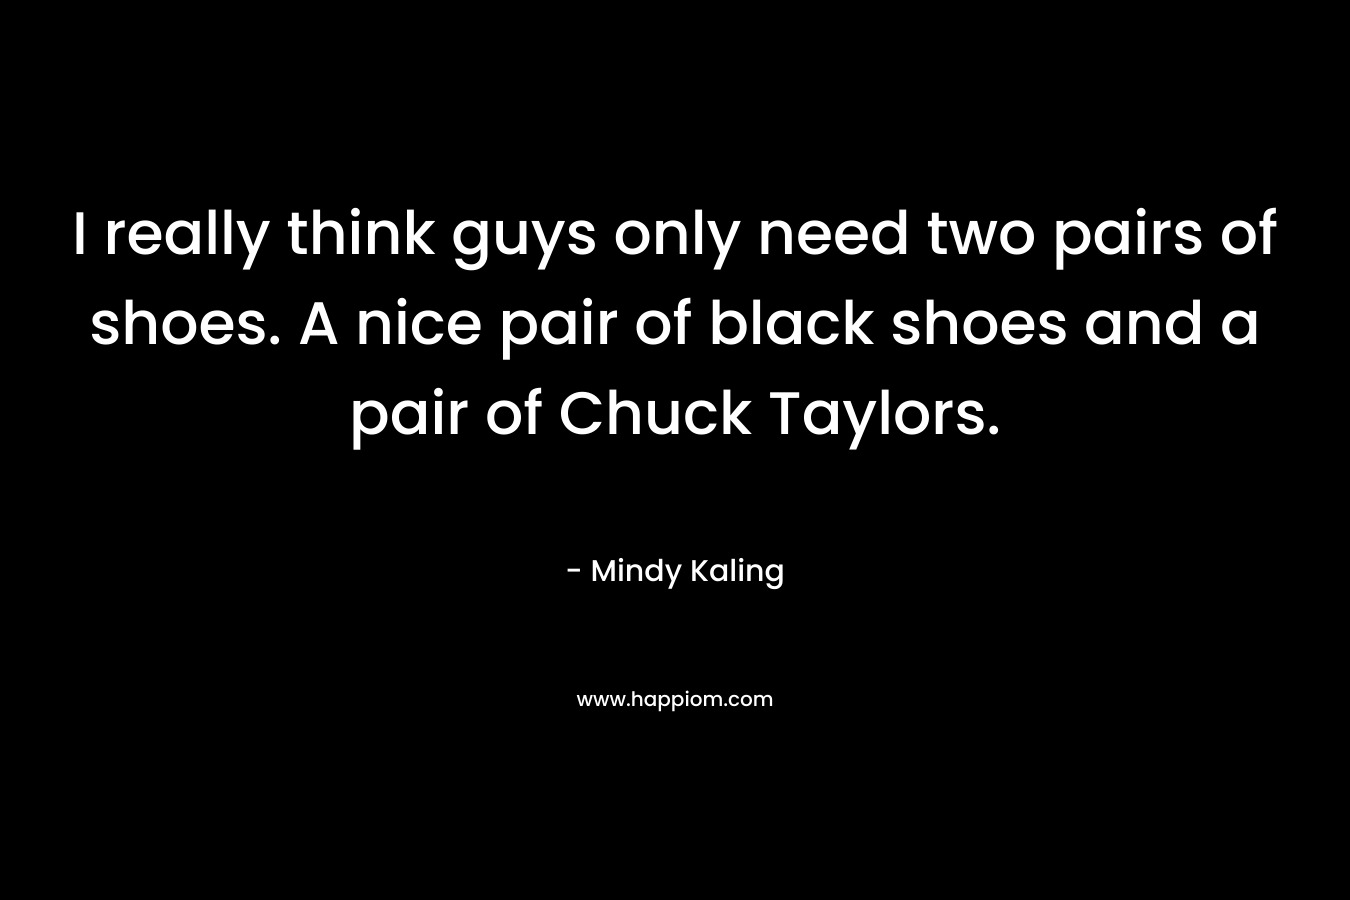 I really think guys only need two pairs of shoes. A nice pair of black shoes and a pair of Chuck Taylors. – Mindy Kaling